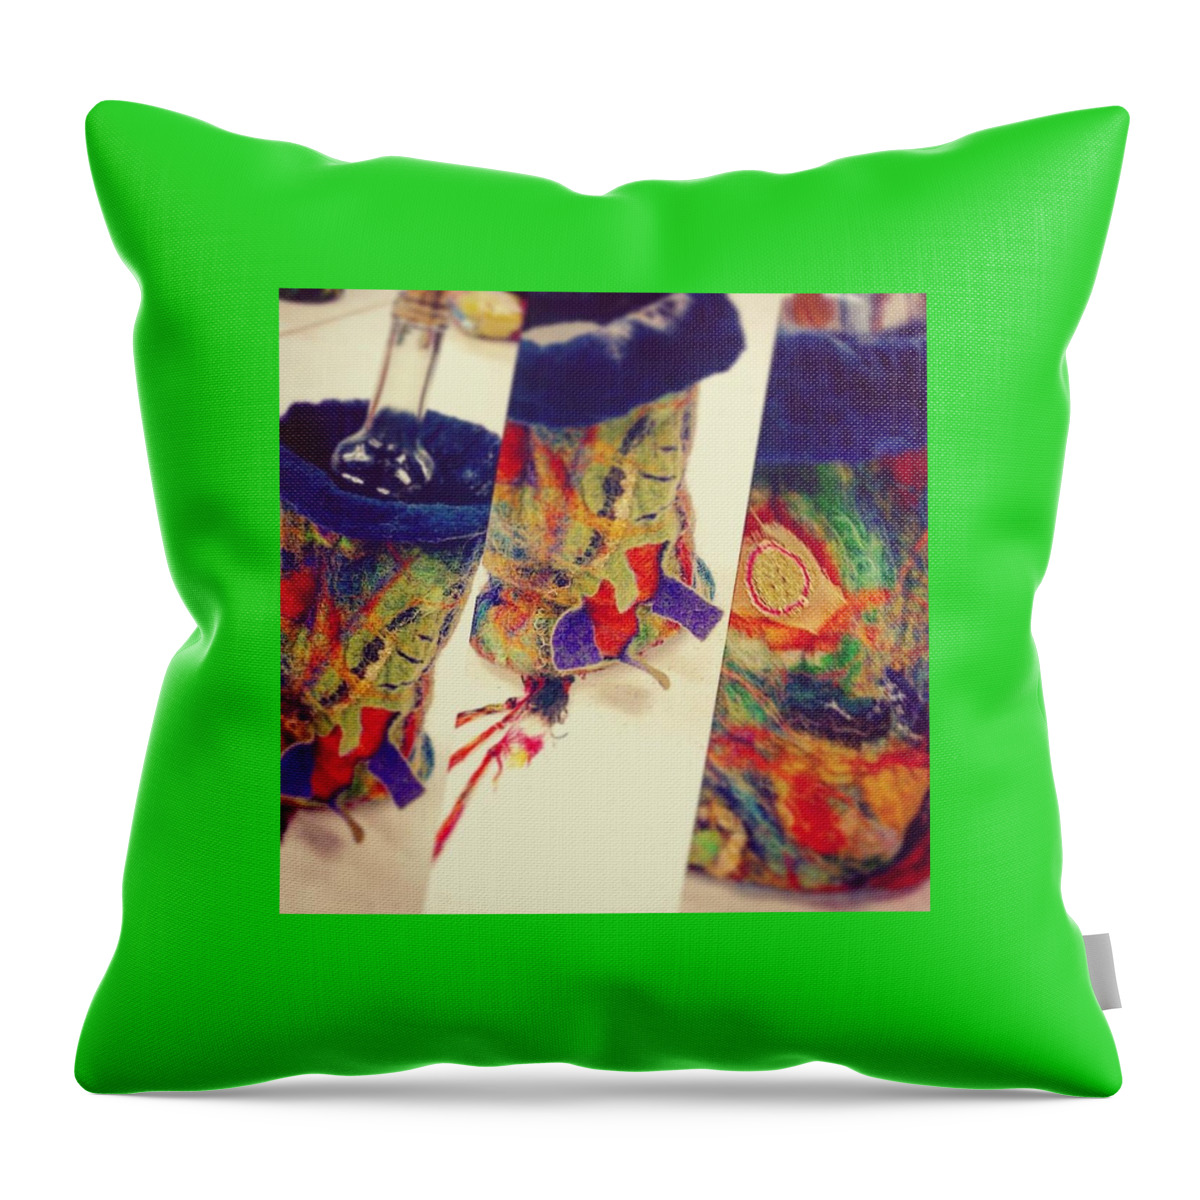 Www.pattishonek.com Throw Pillow featuring the painting Wet and Needle Felted Wine Cozy by Patti Shonek